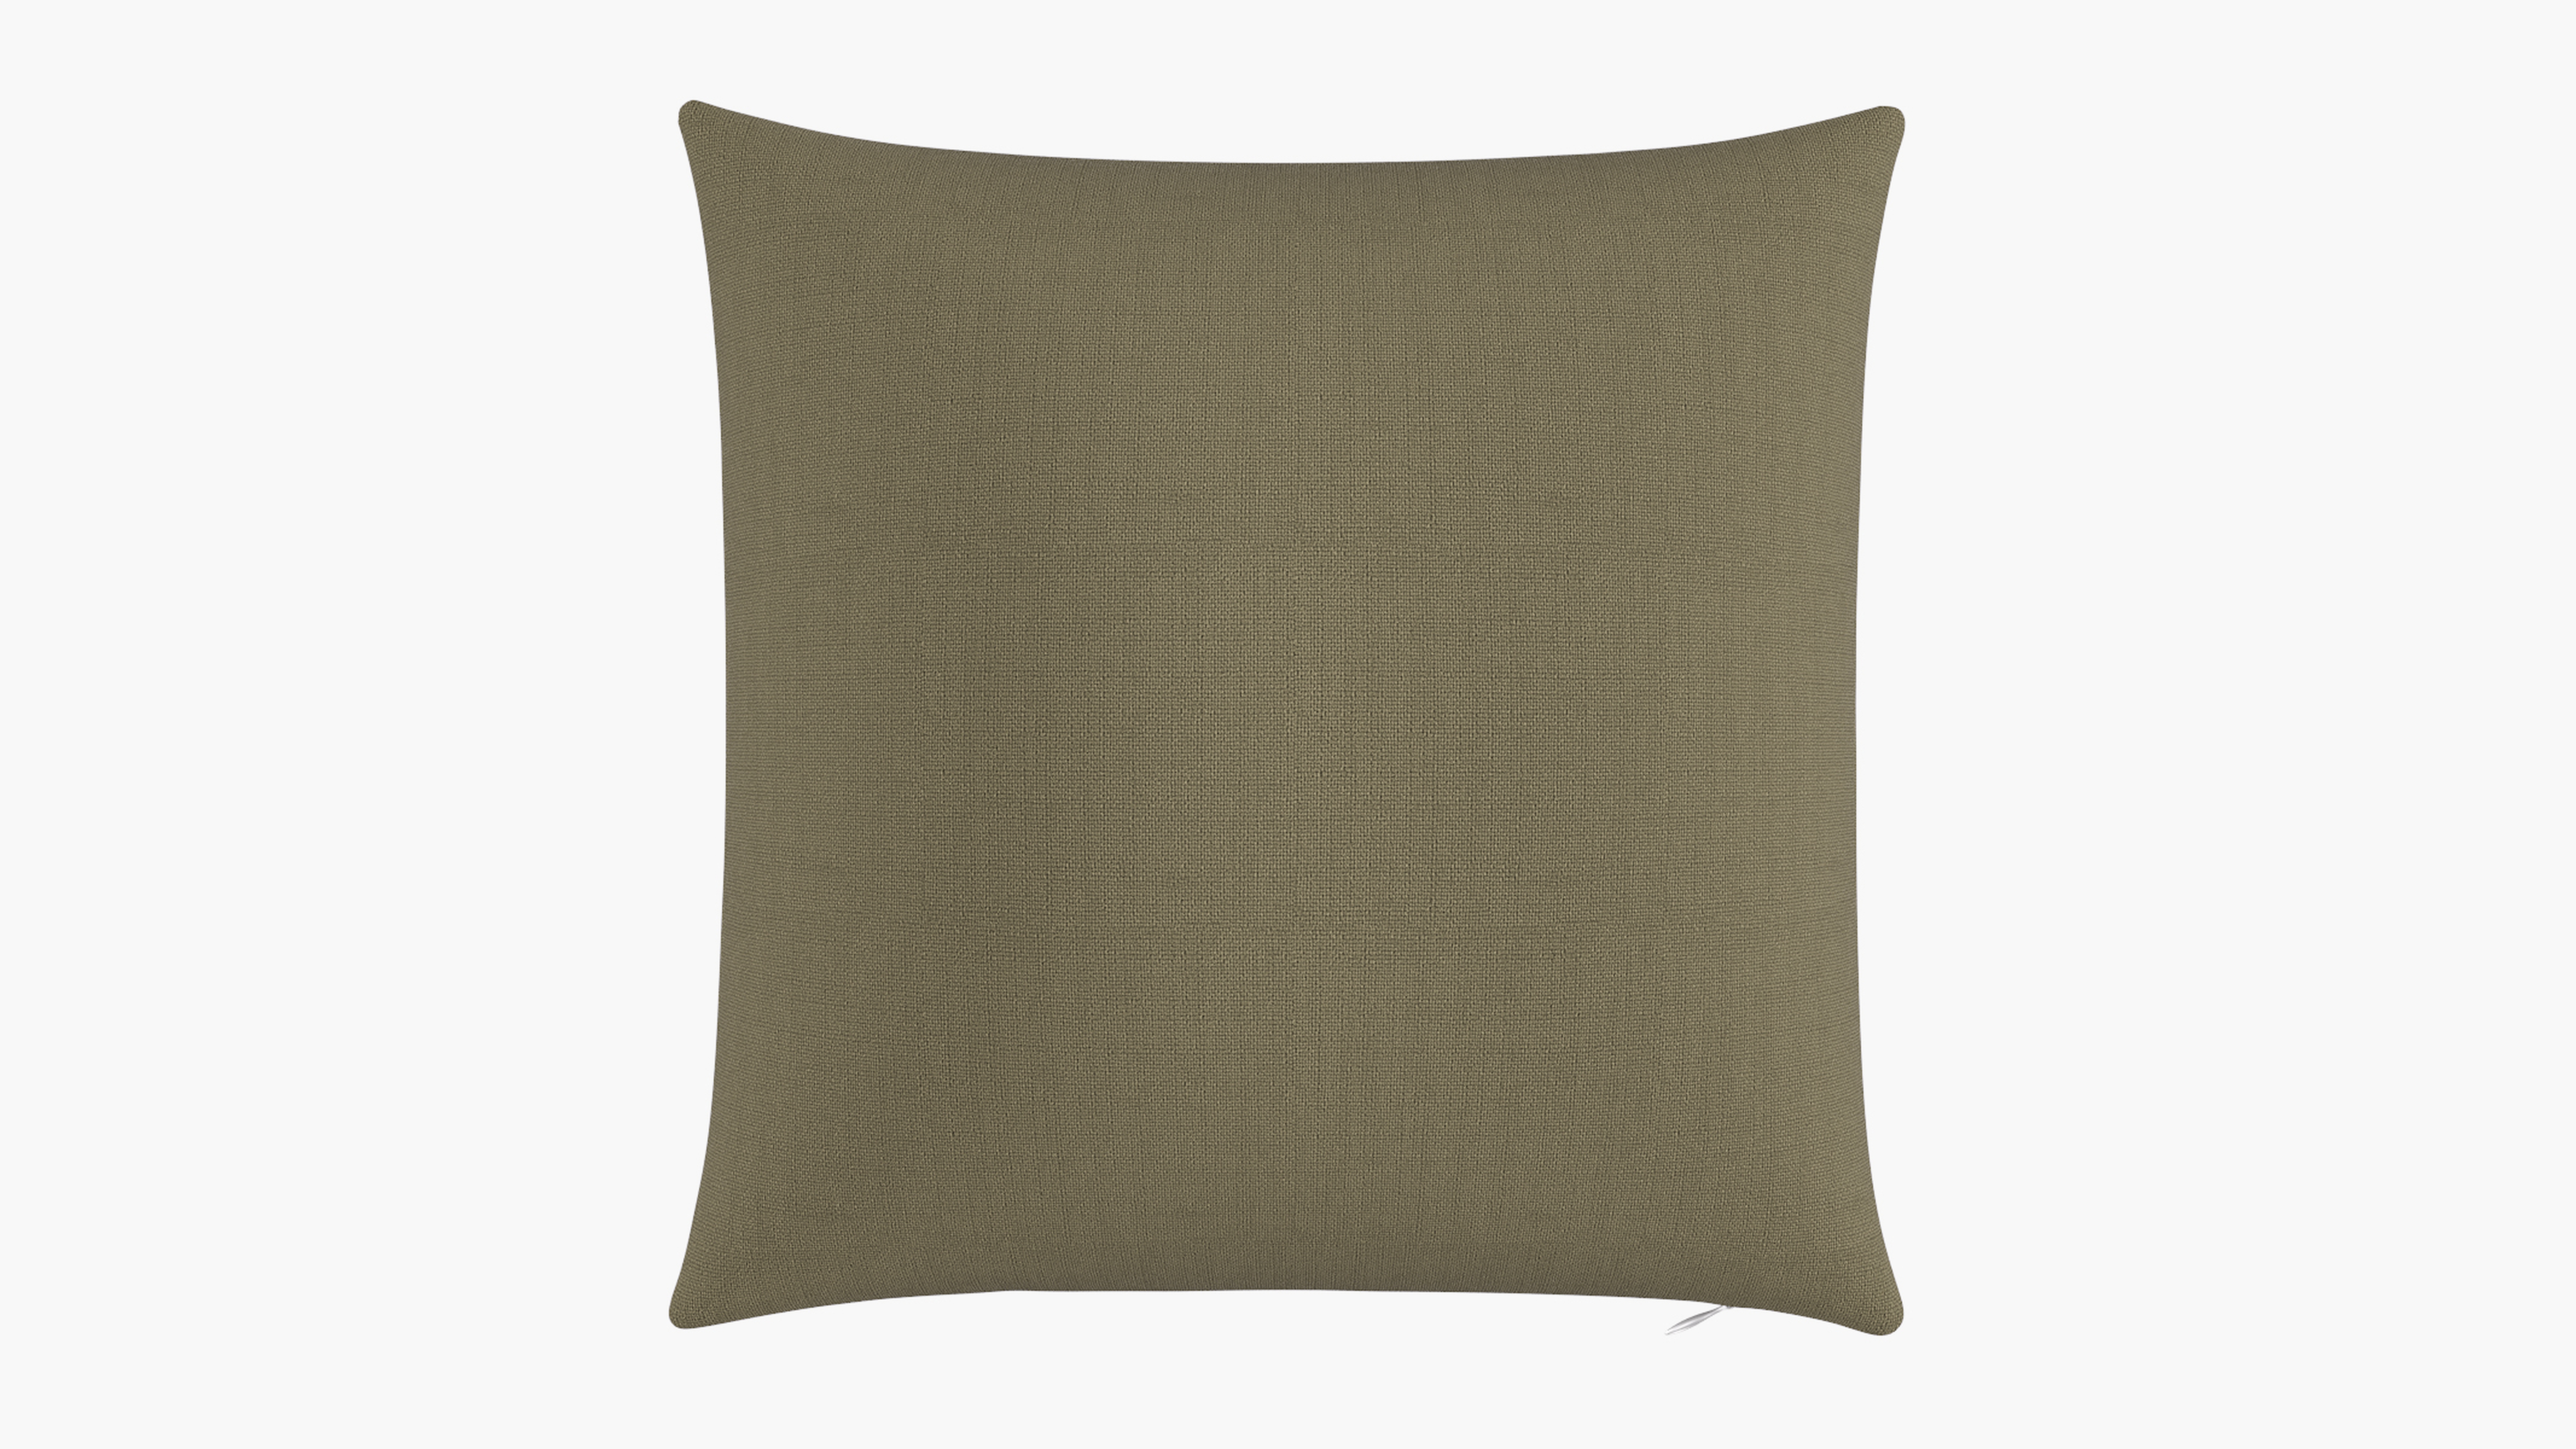 Throw Pillow 20" | Olive Linen - The Inside